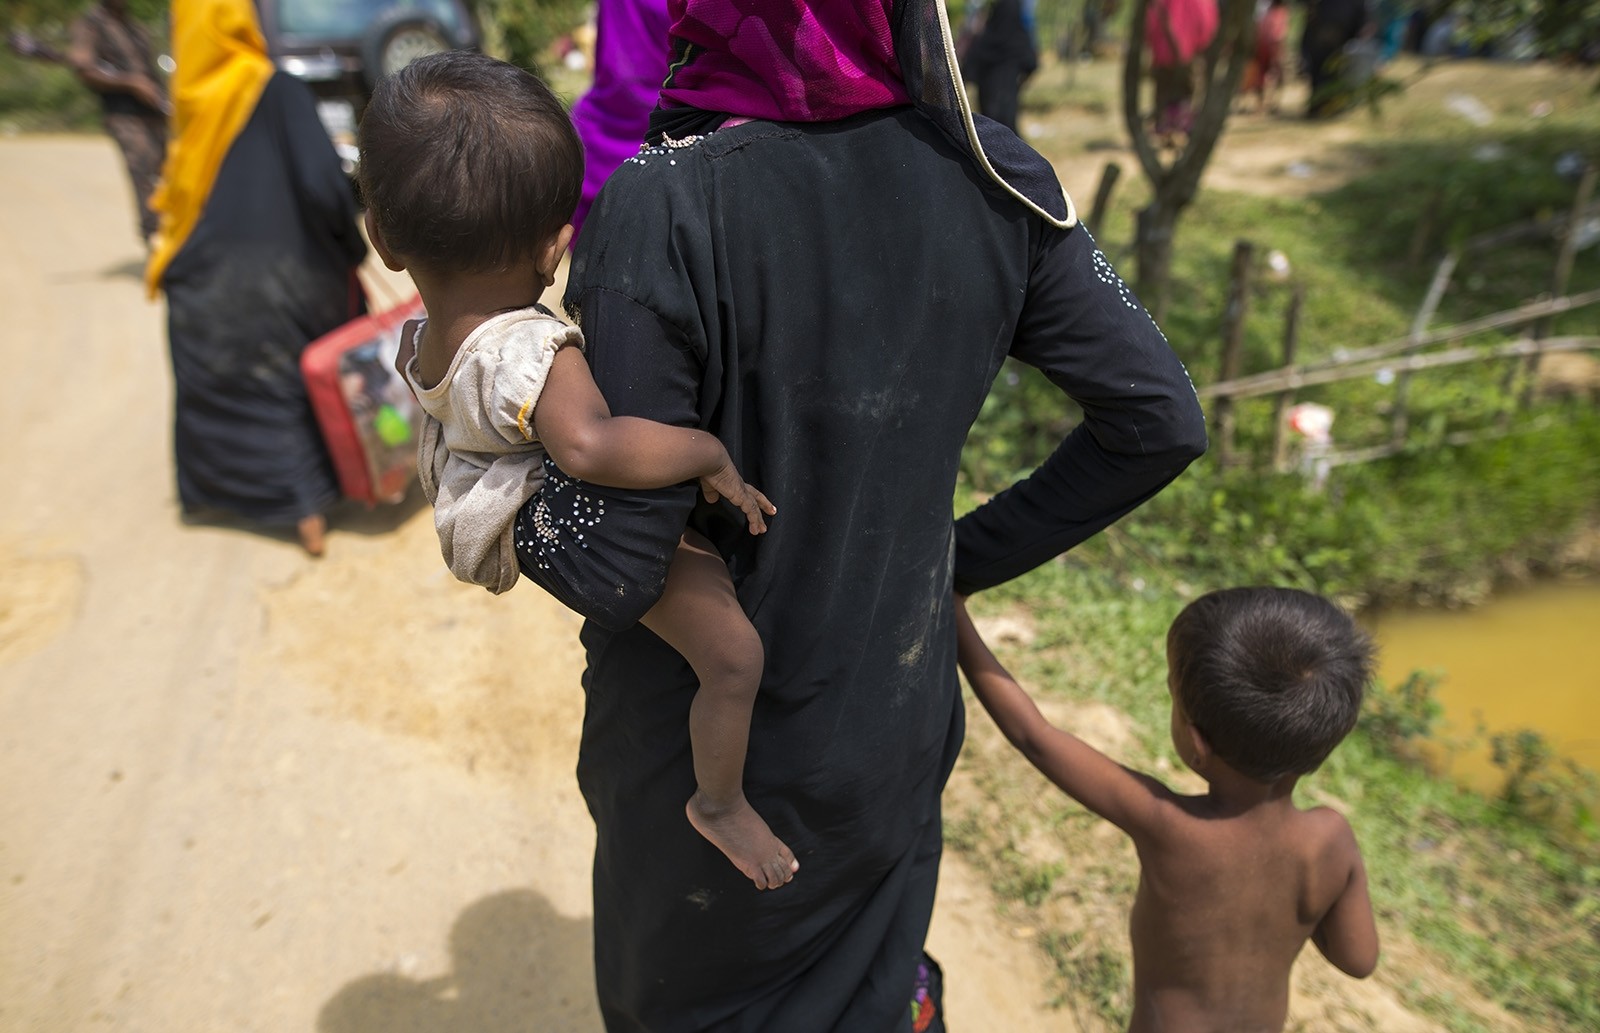 Britain asks for UNSC meeting on violence against Rohingya Muslims